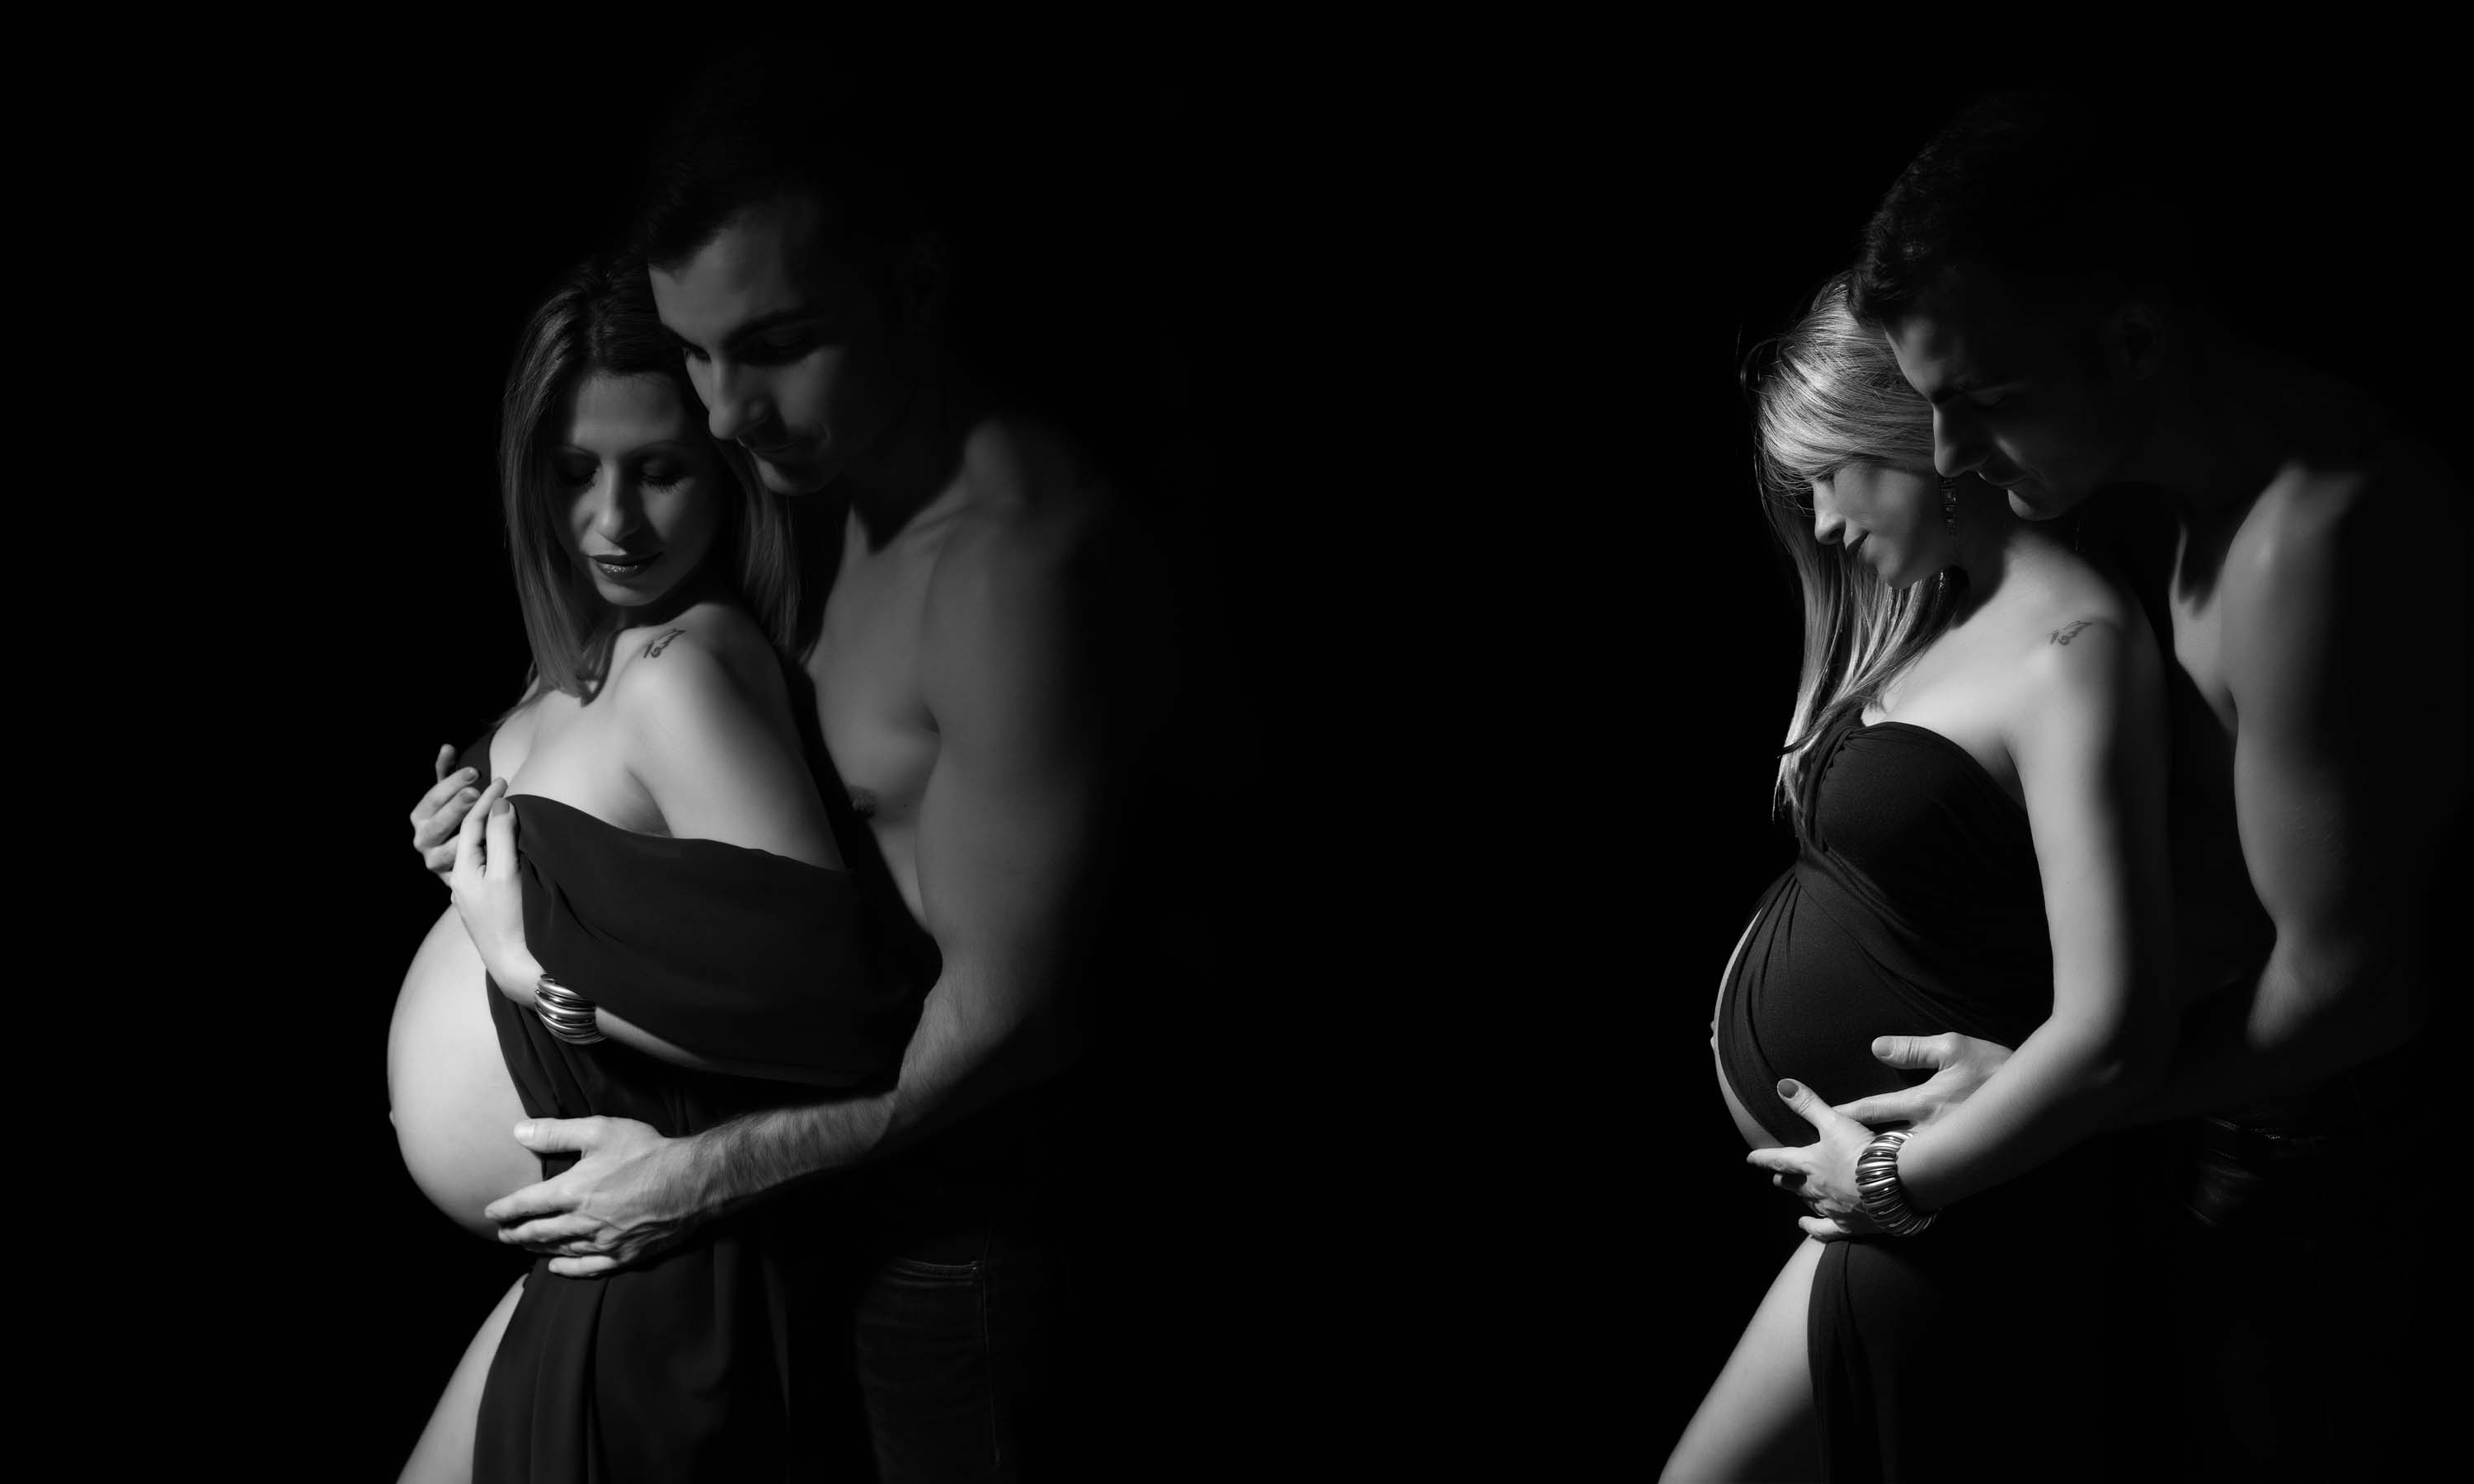 Black and white maternity photo shoot with two images of the same couple